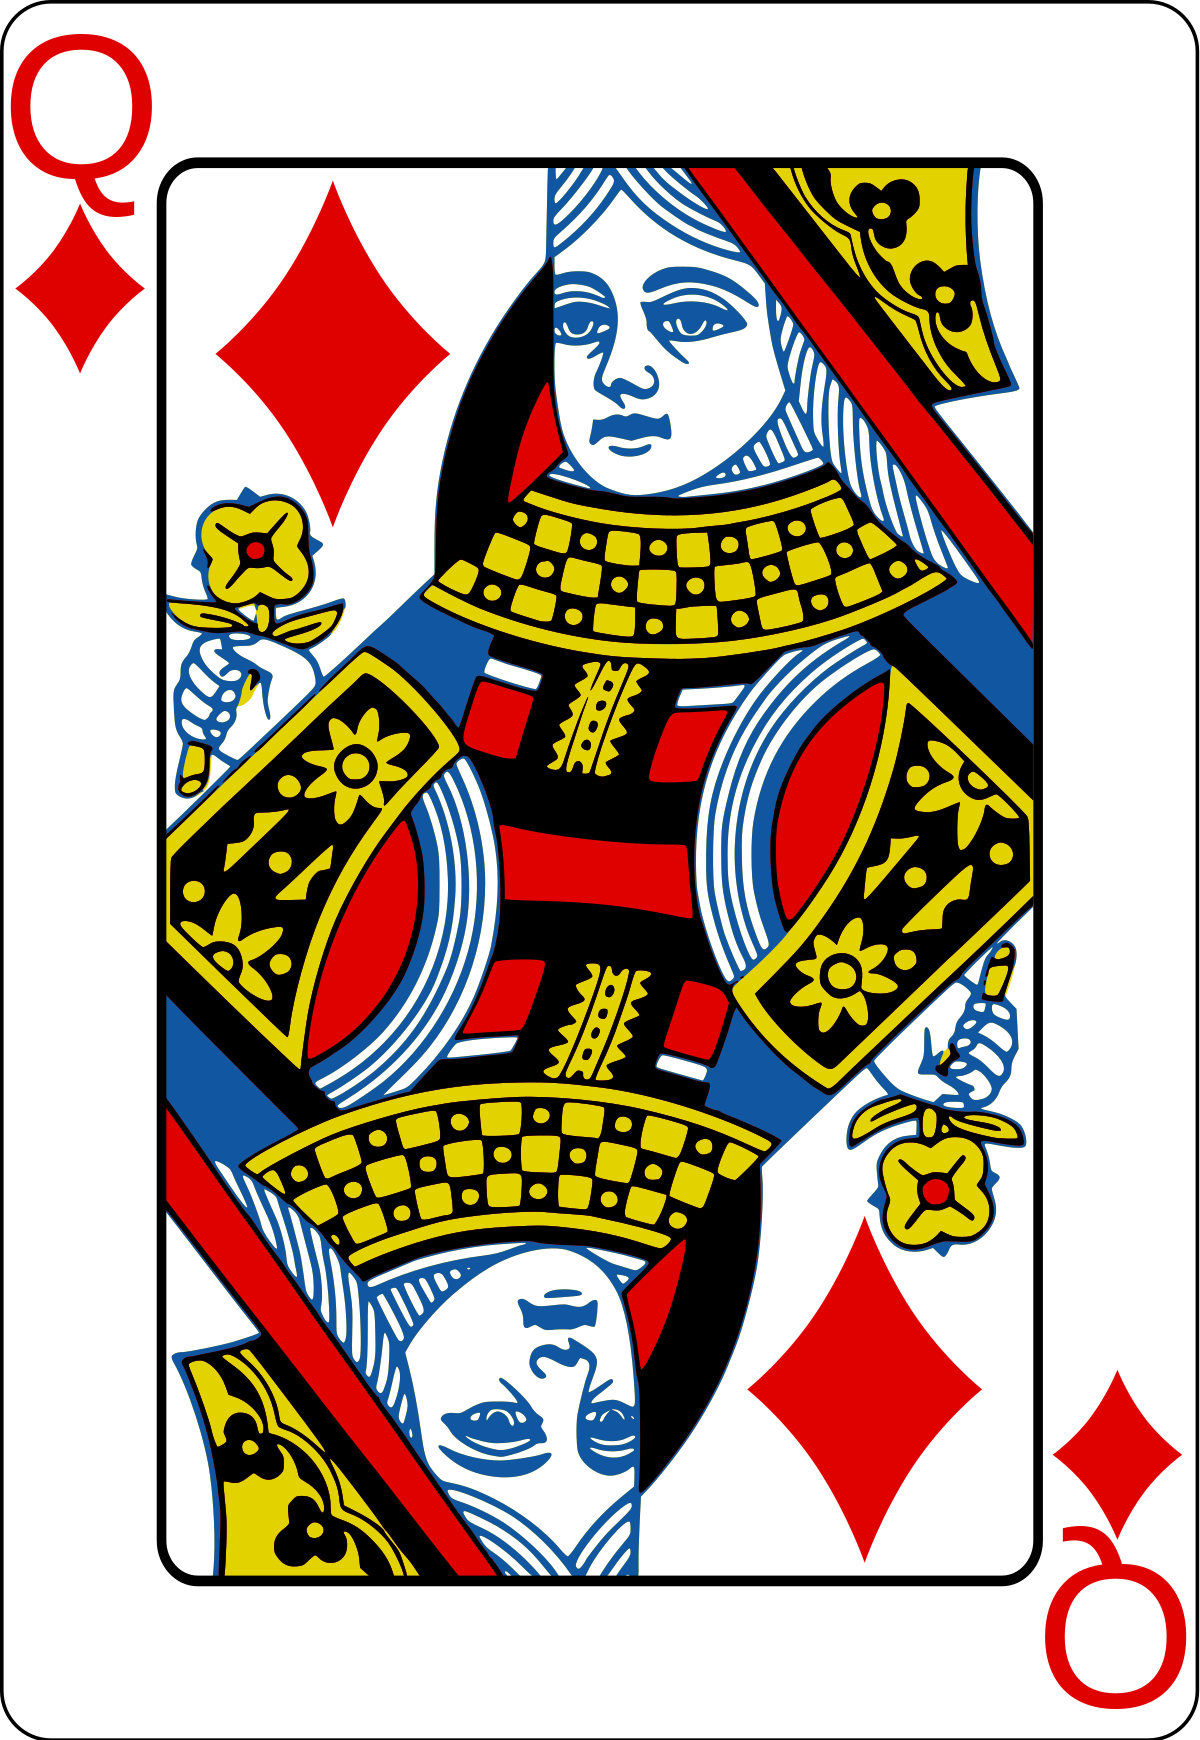 Download File:Queen of diamonds2.svg - Wikimedia Commons